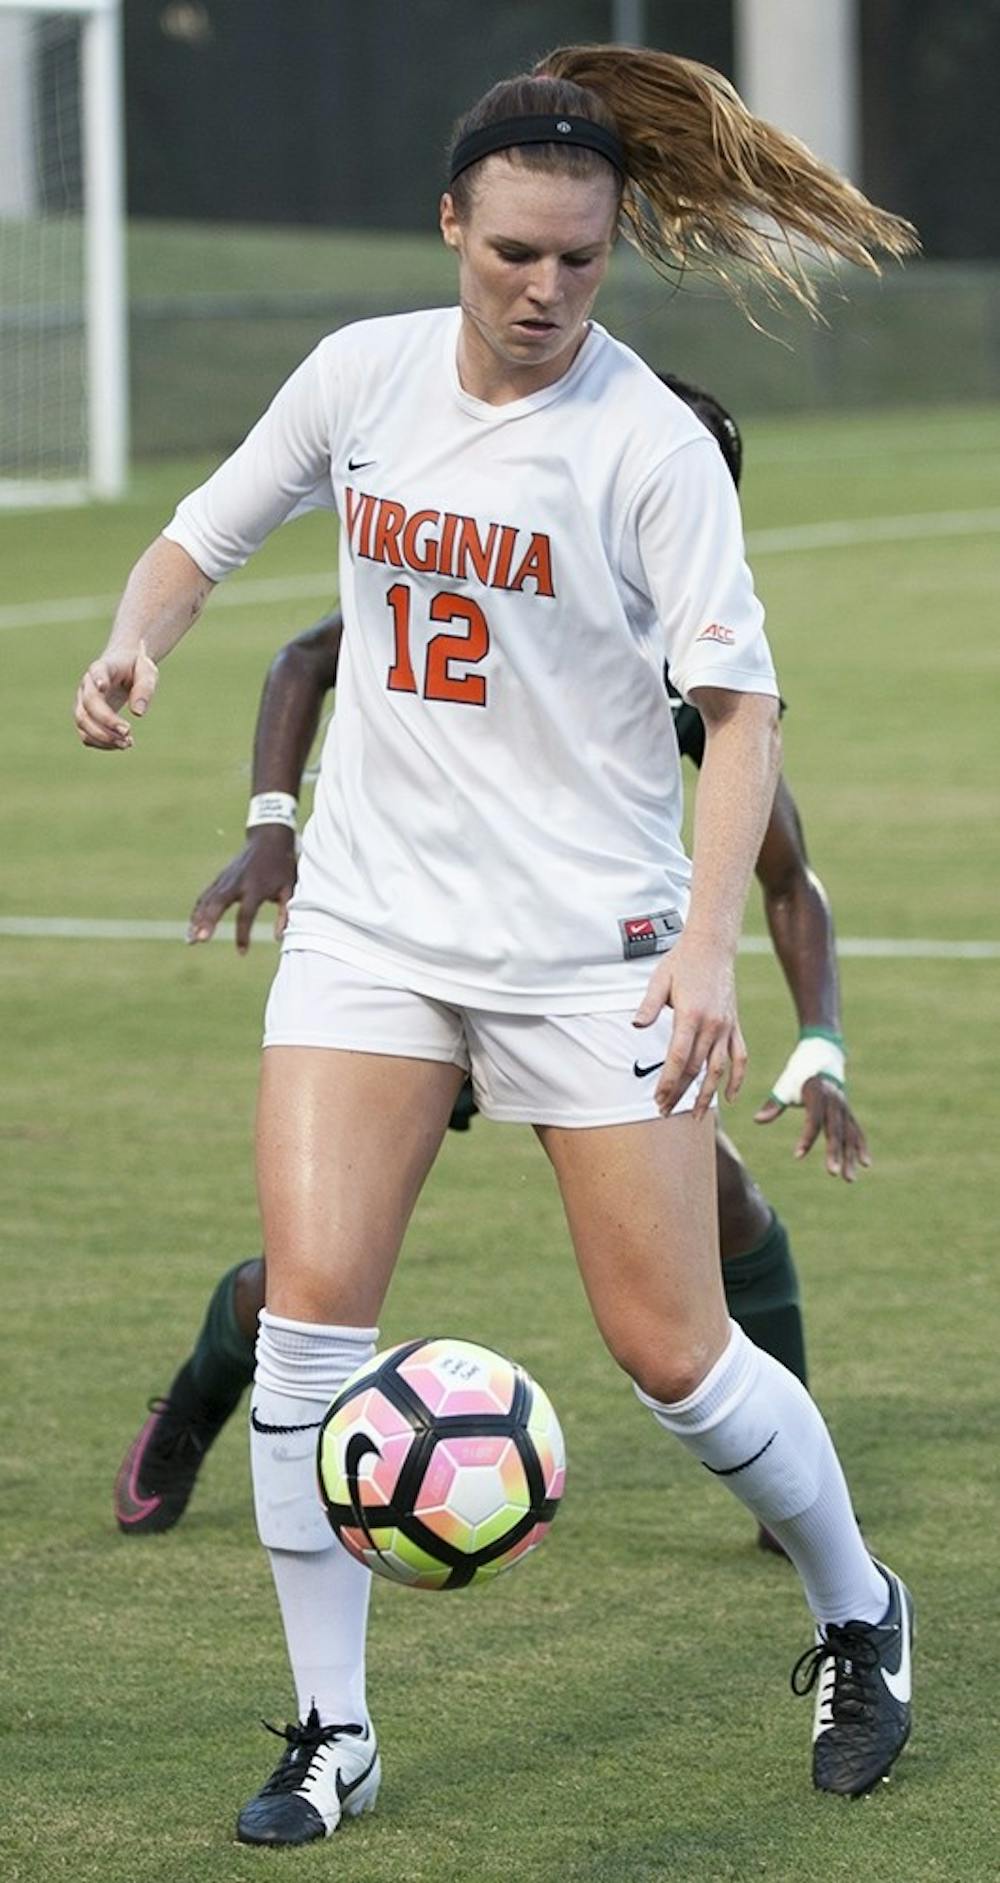 <p>Senior forward Veronica Latsko led Virginia this season with 20 points from eight goals and four assists and landed on the All-ACC first team.</p>